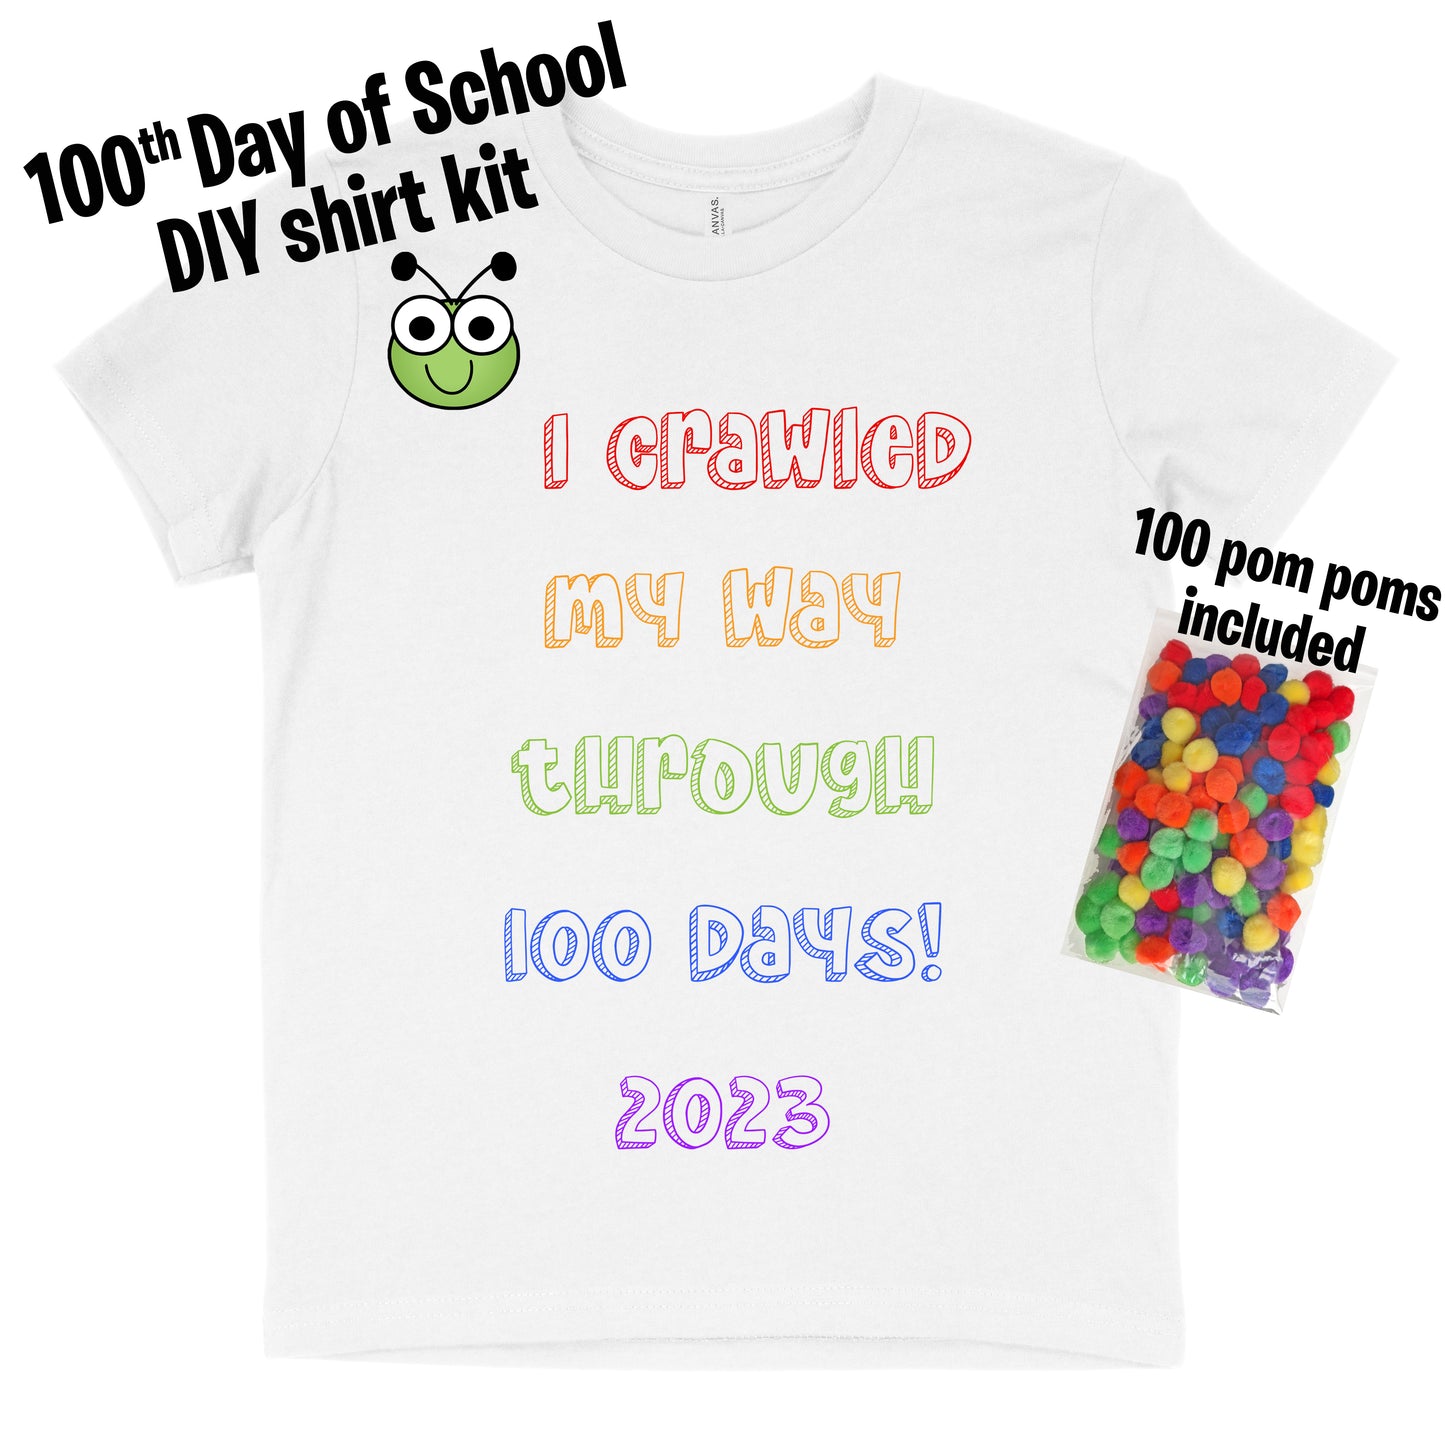 Make your own 100th day of school shirt